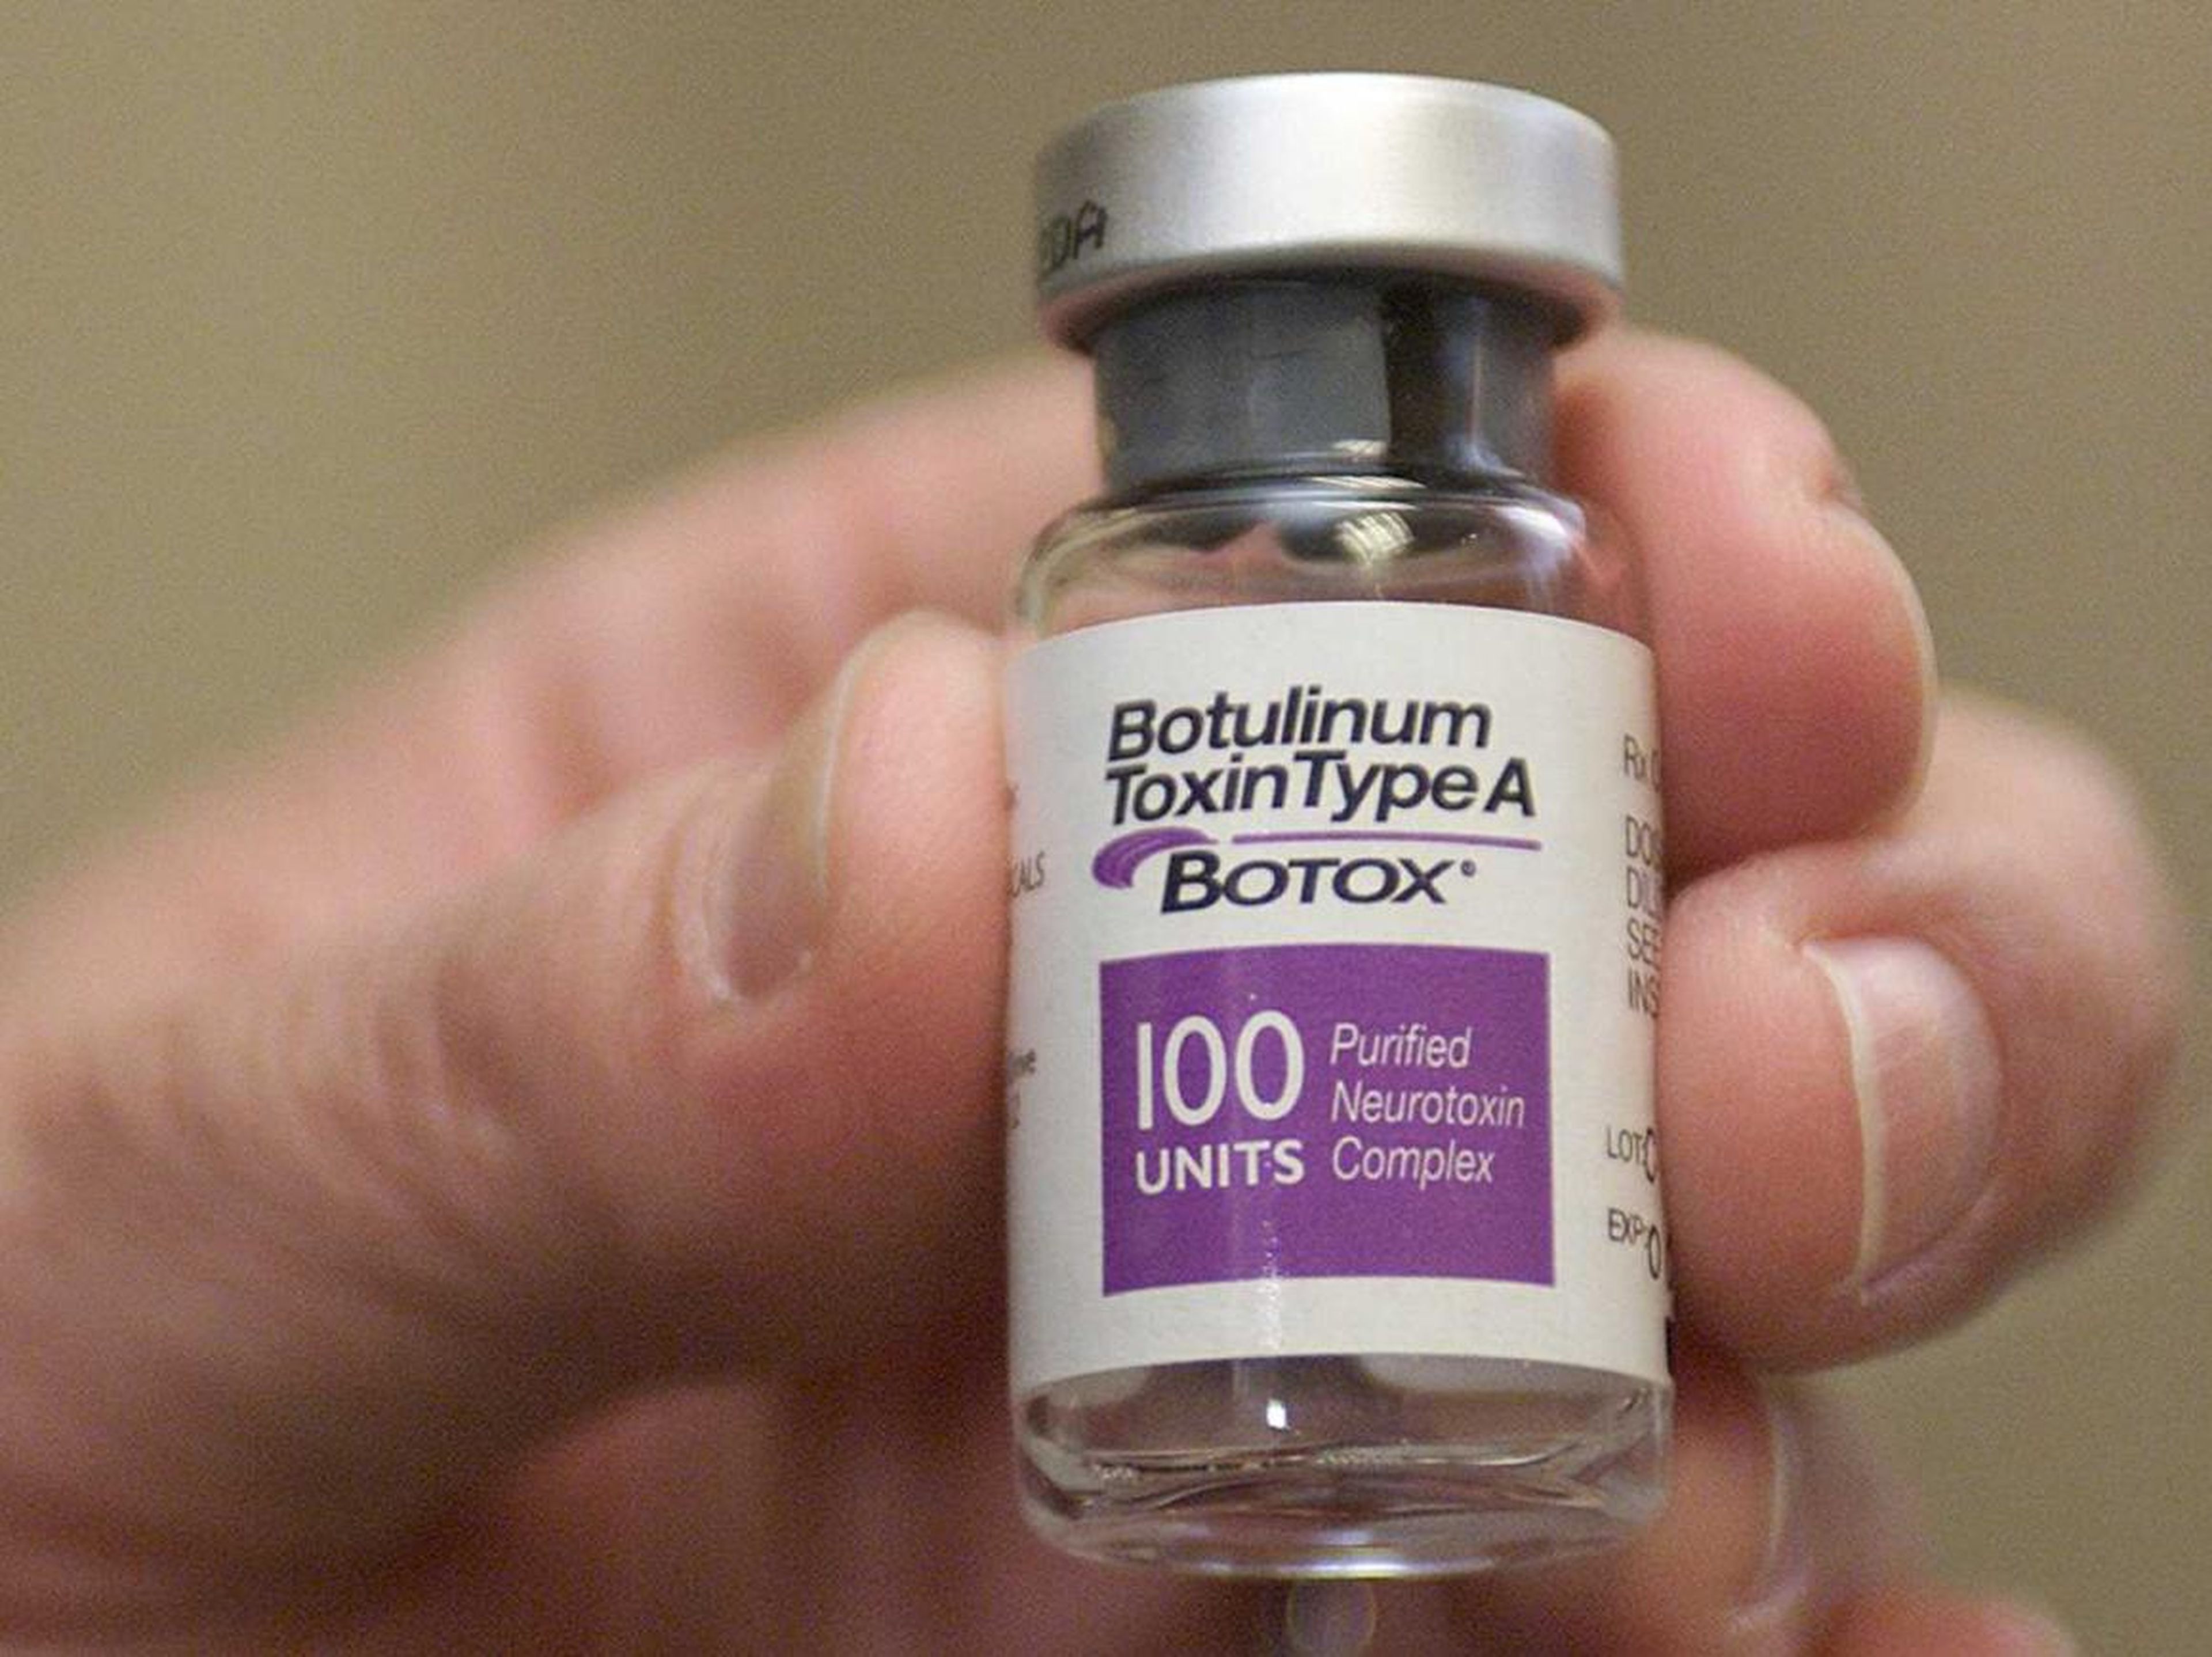 Researchers had been looking into whether botulinum toxin, a neurotoxin that works by paralyzing parts of the body, could be used as a treatment for muscle-related conditions starting around the 1970s.